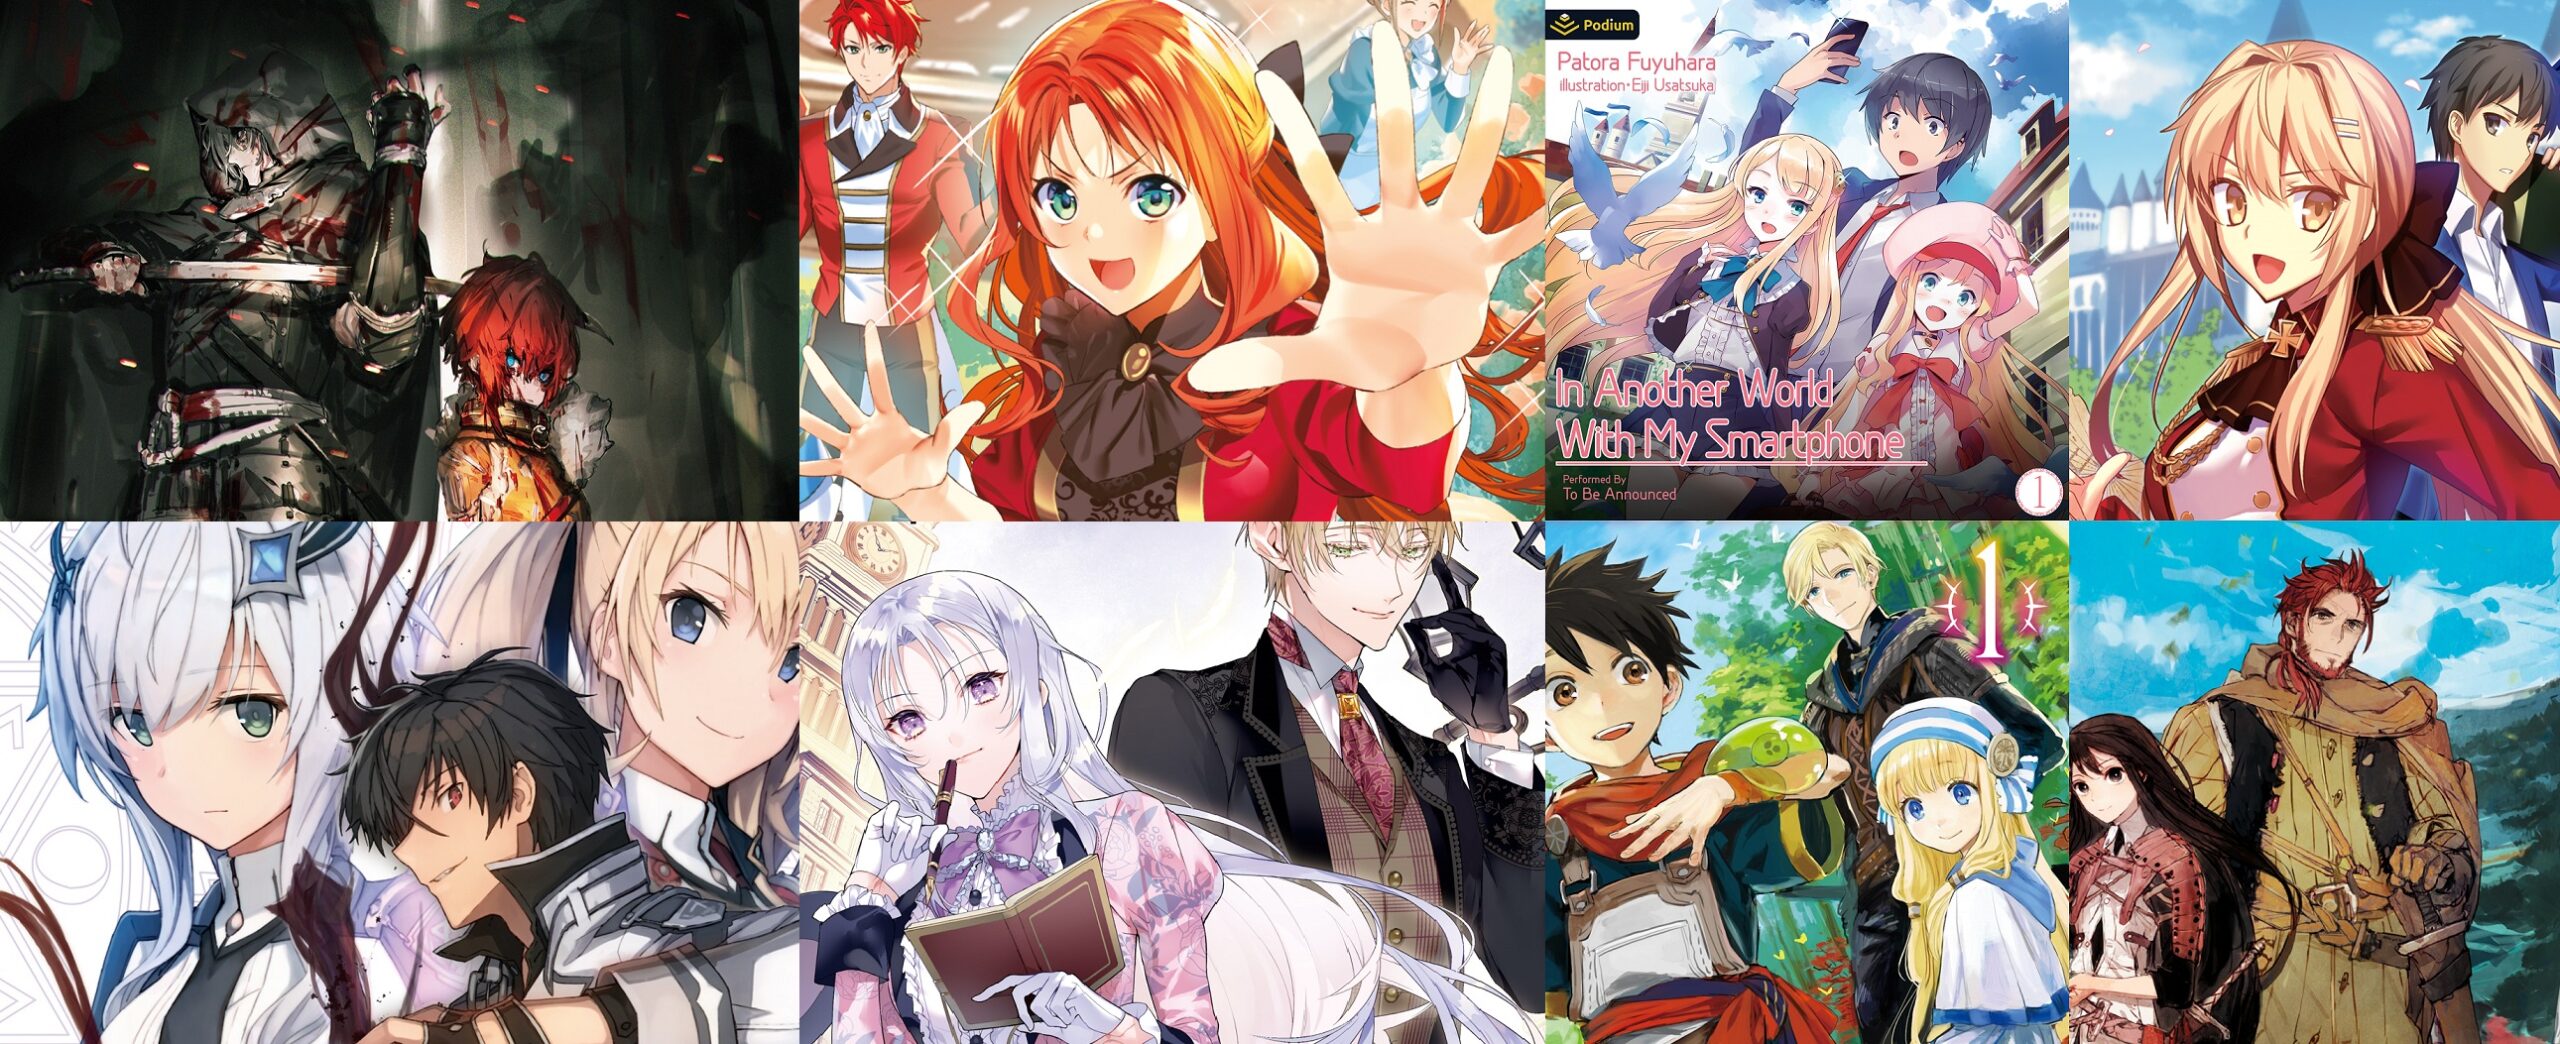 Anime-Planet Launches Online Reading Portal in Partnership with J-Novel Club  - News - Anime News Network